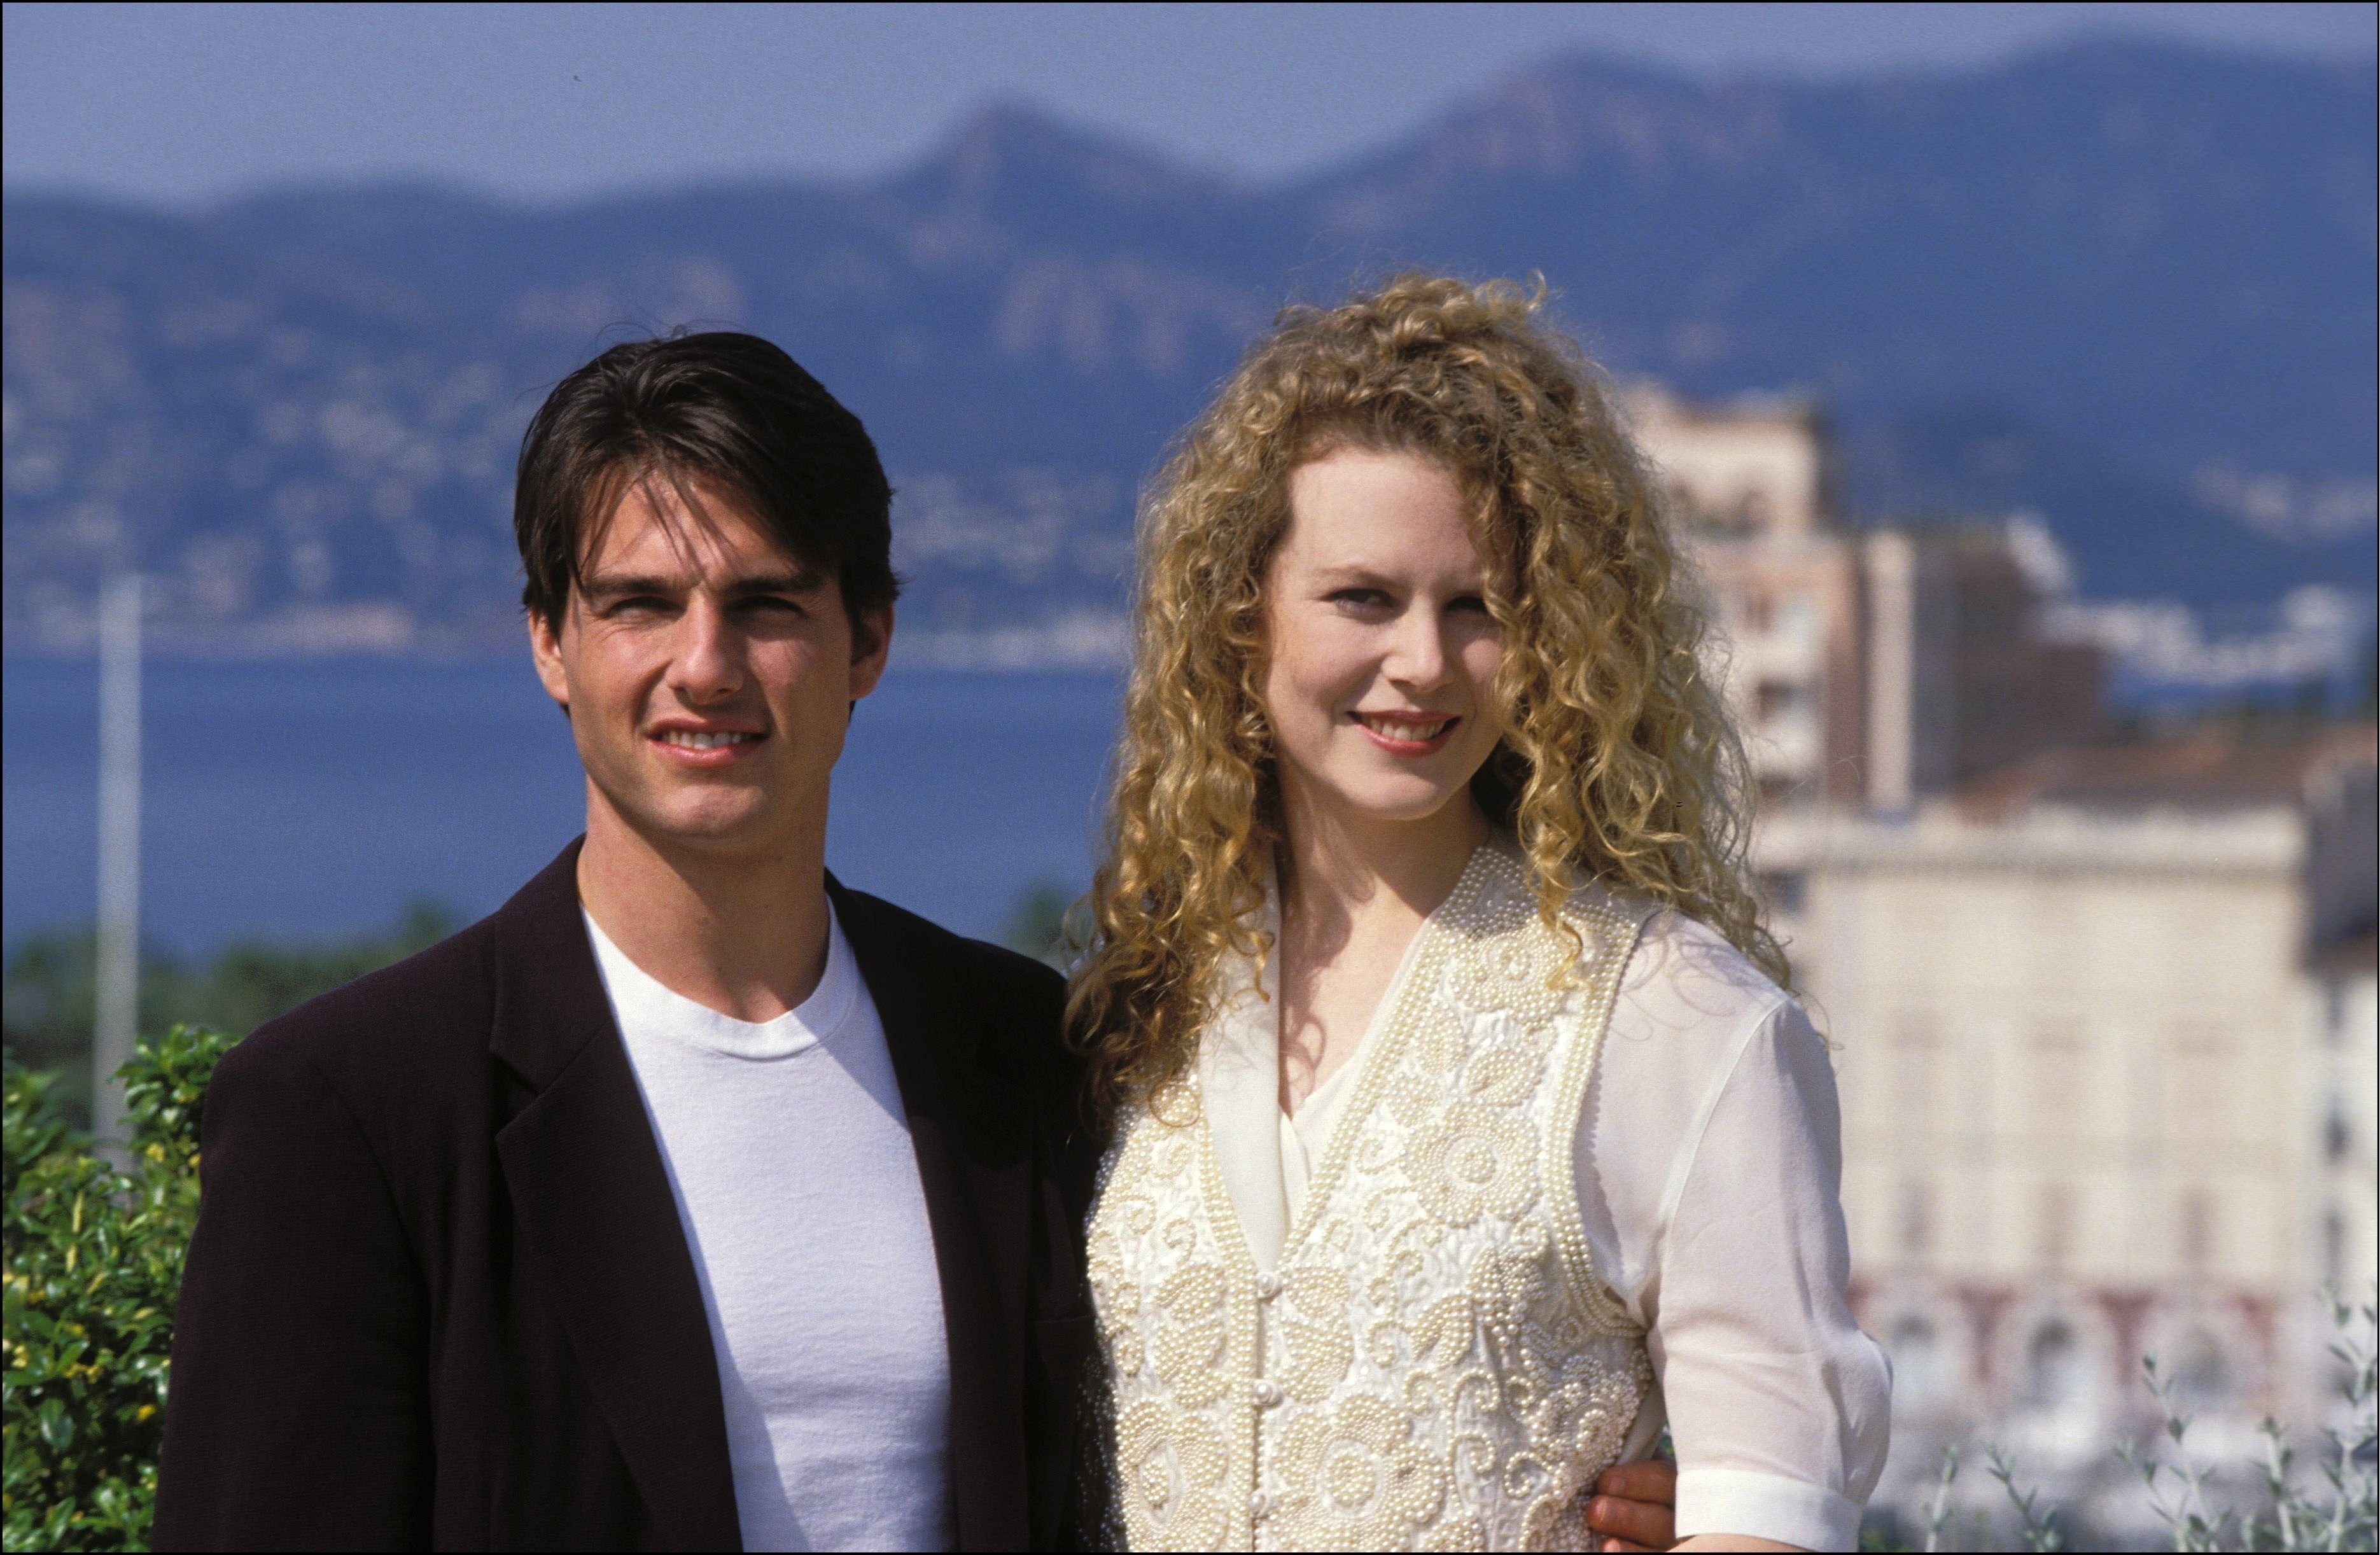 Tom Cruise and Nicole Kidman In Cannes, France, May 17, 1992 | Photo: Getty Images